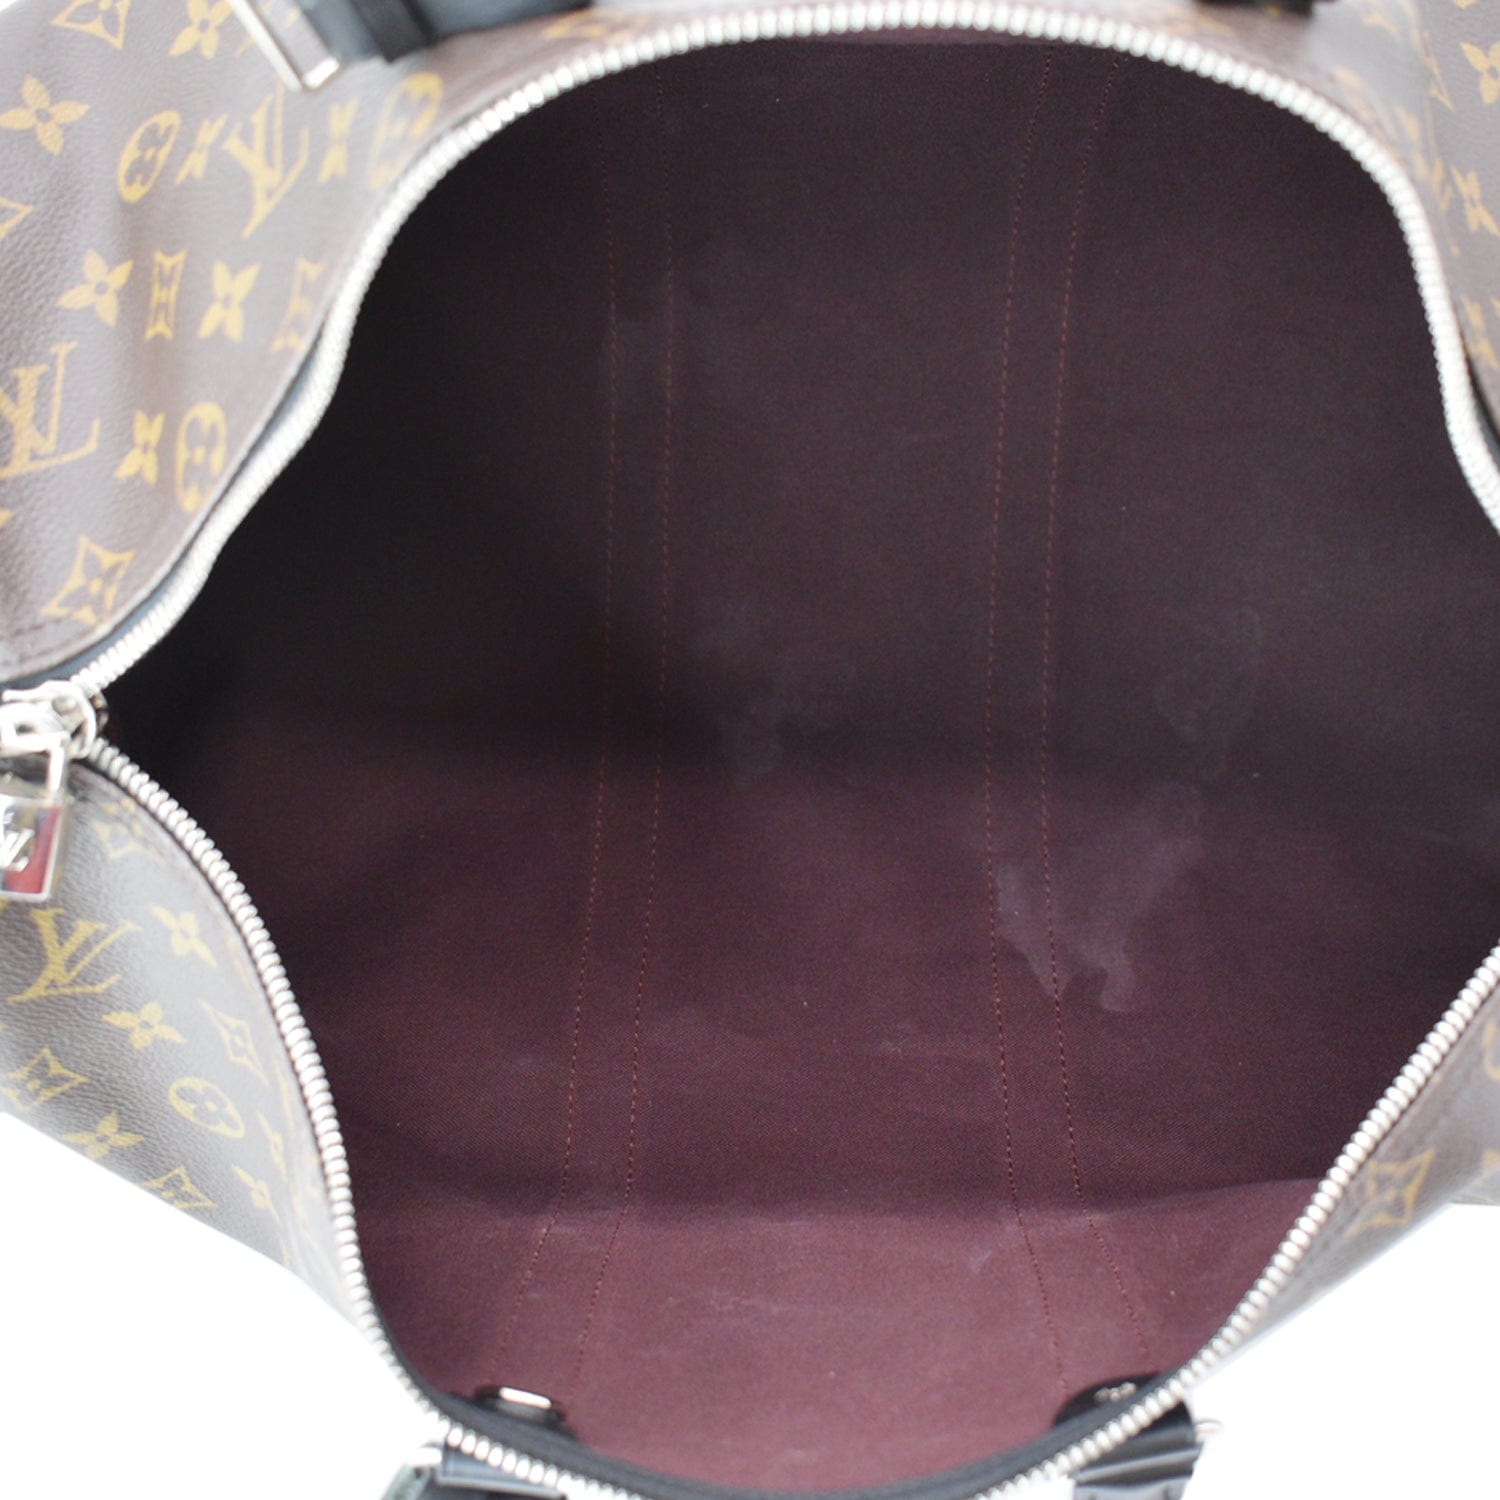 Louis Vuitton Keepall Bandouliere Monogram Outdoor 45 Brown in Canvas with  Multicolor - US